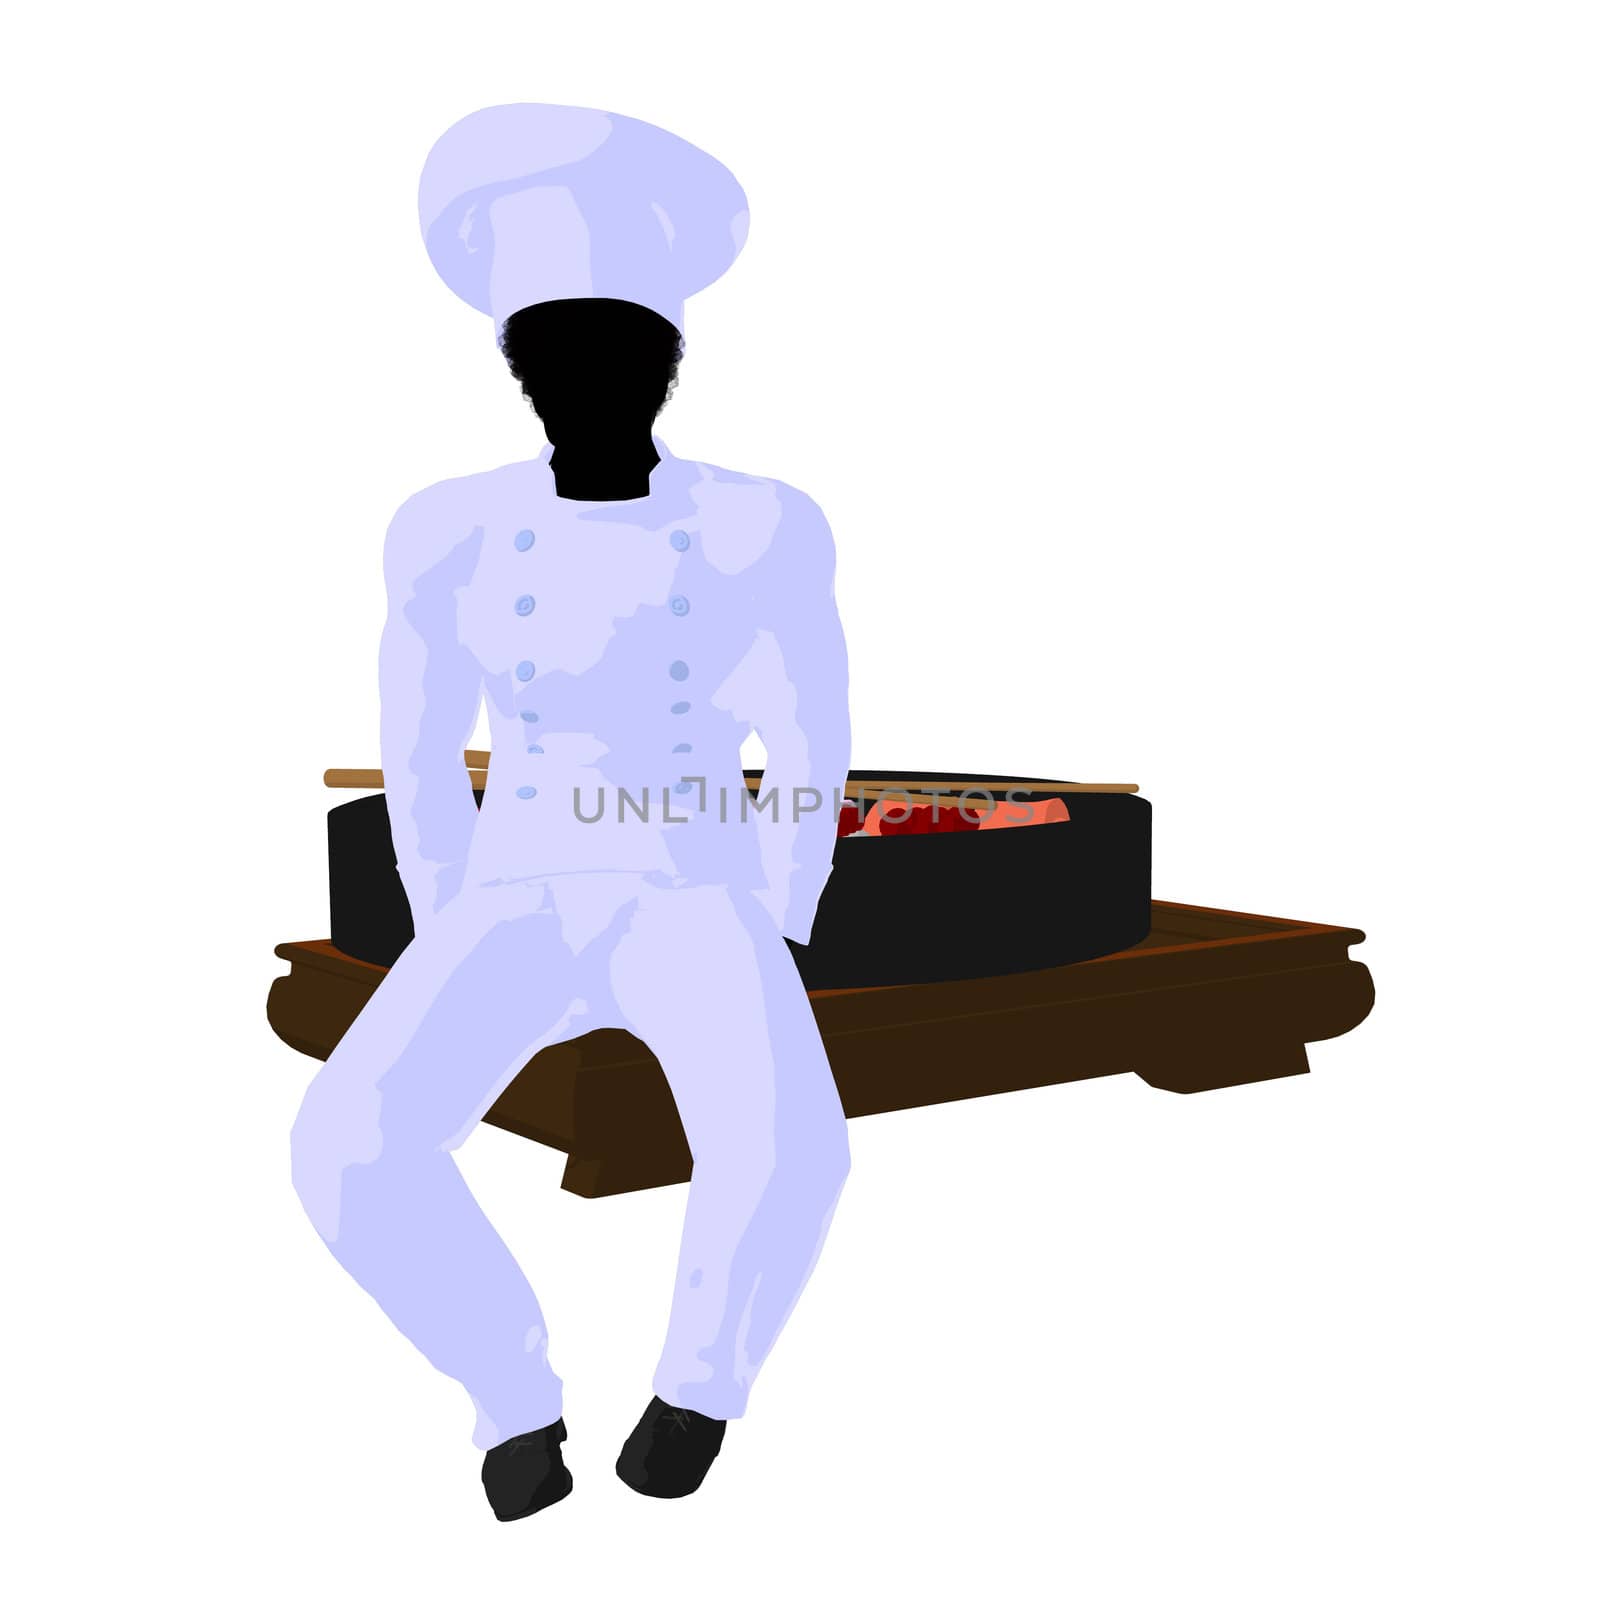 African american chef with sushi silhouette on a white background